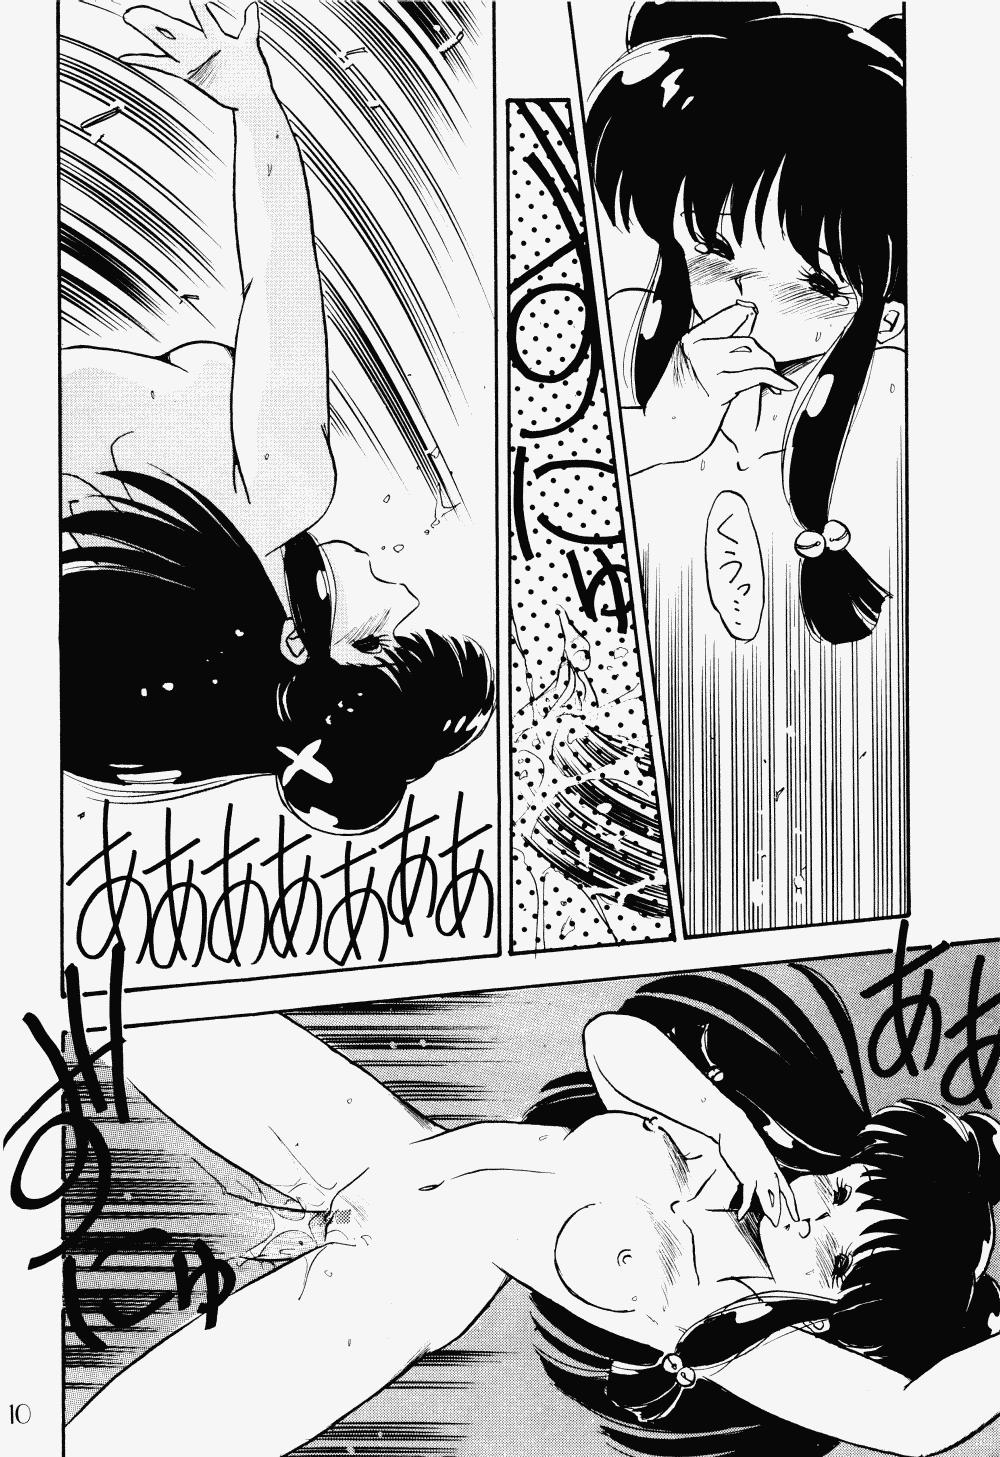 Bound Pussy Cat Vol. 17 - Ranma 12 Load - Page 8